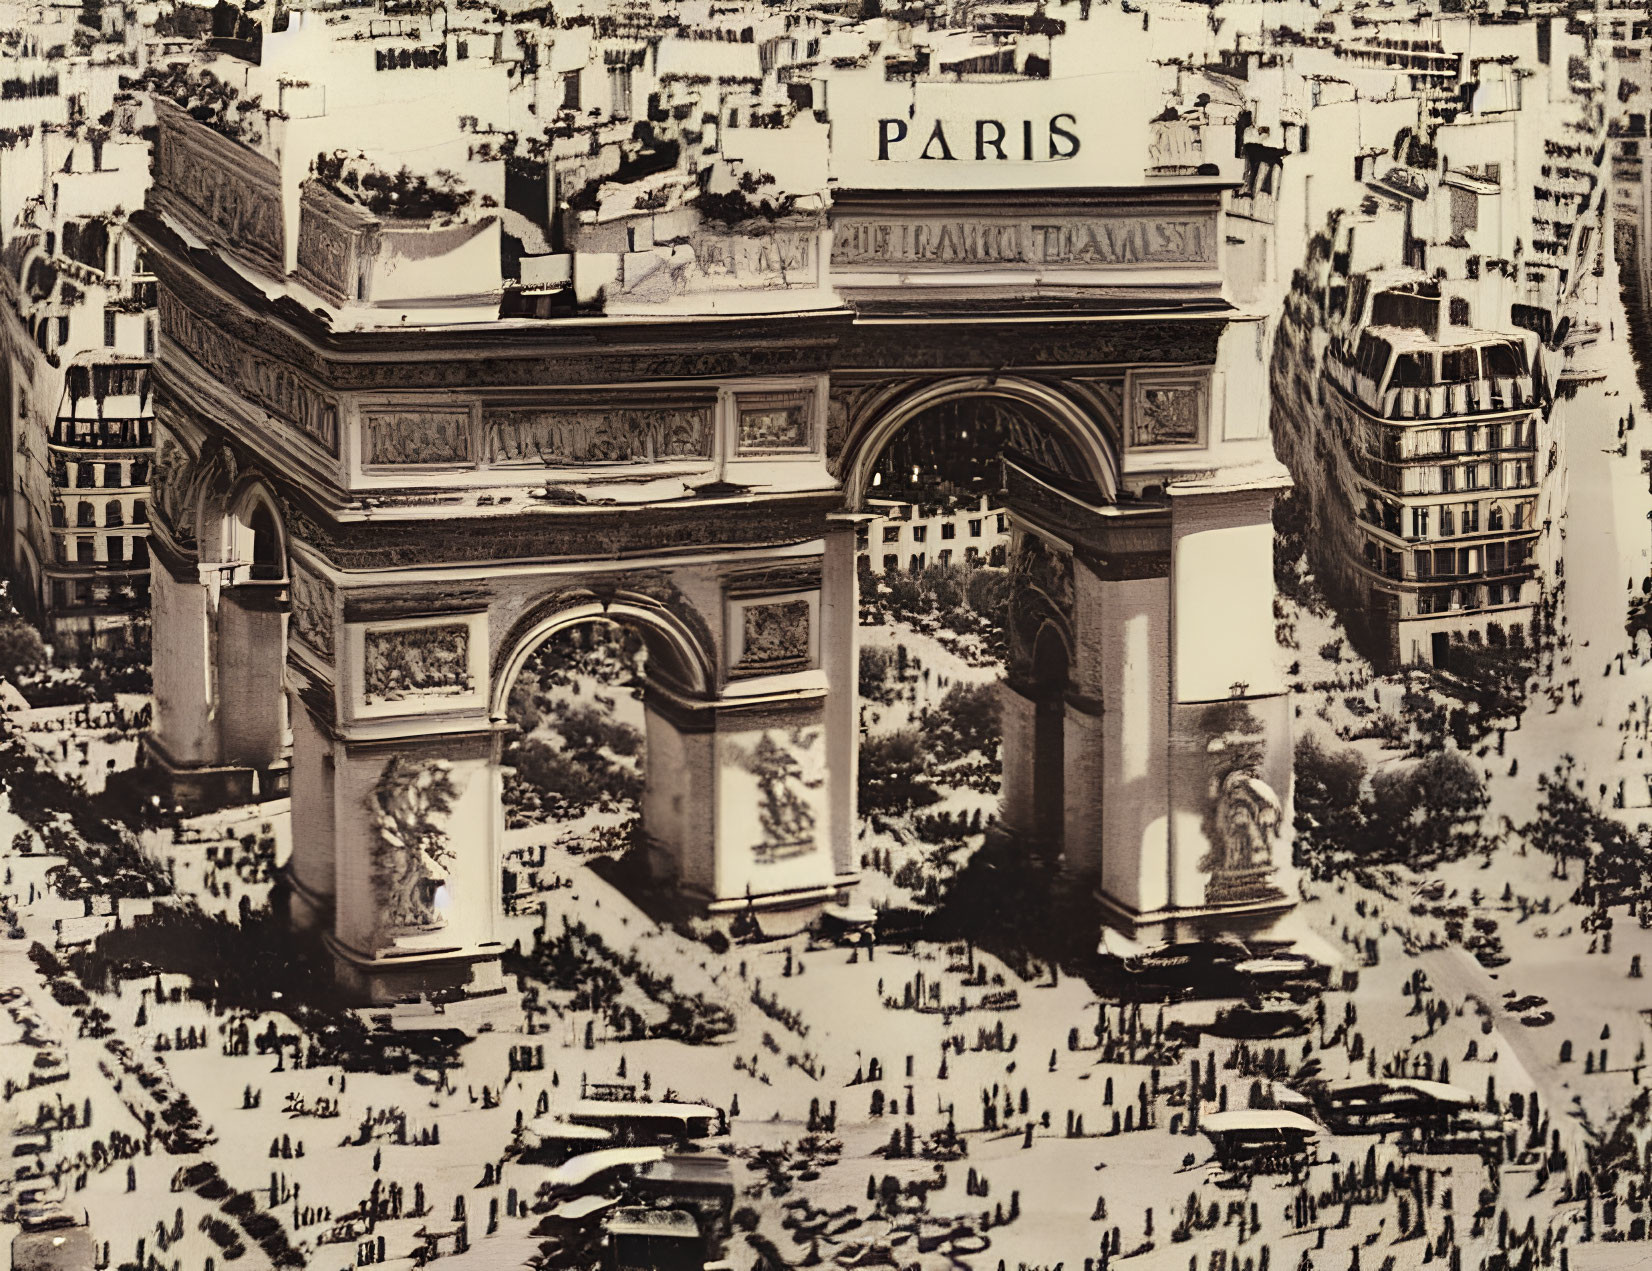 Monochrome Arc de Triomphe with "PARIS" overlay and vintage figures in a bustling scene